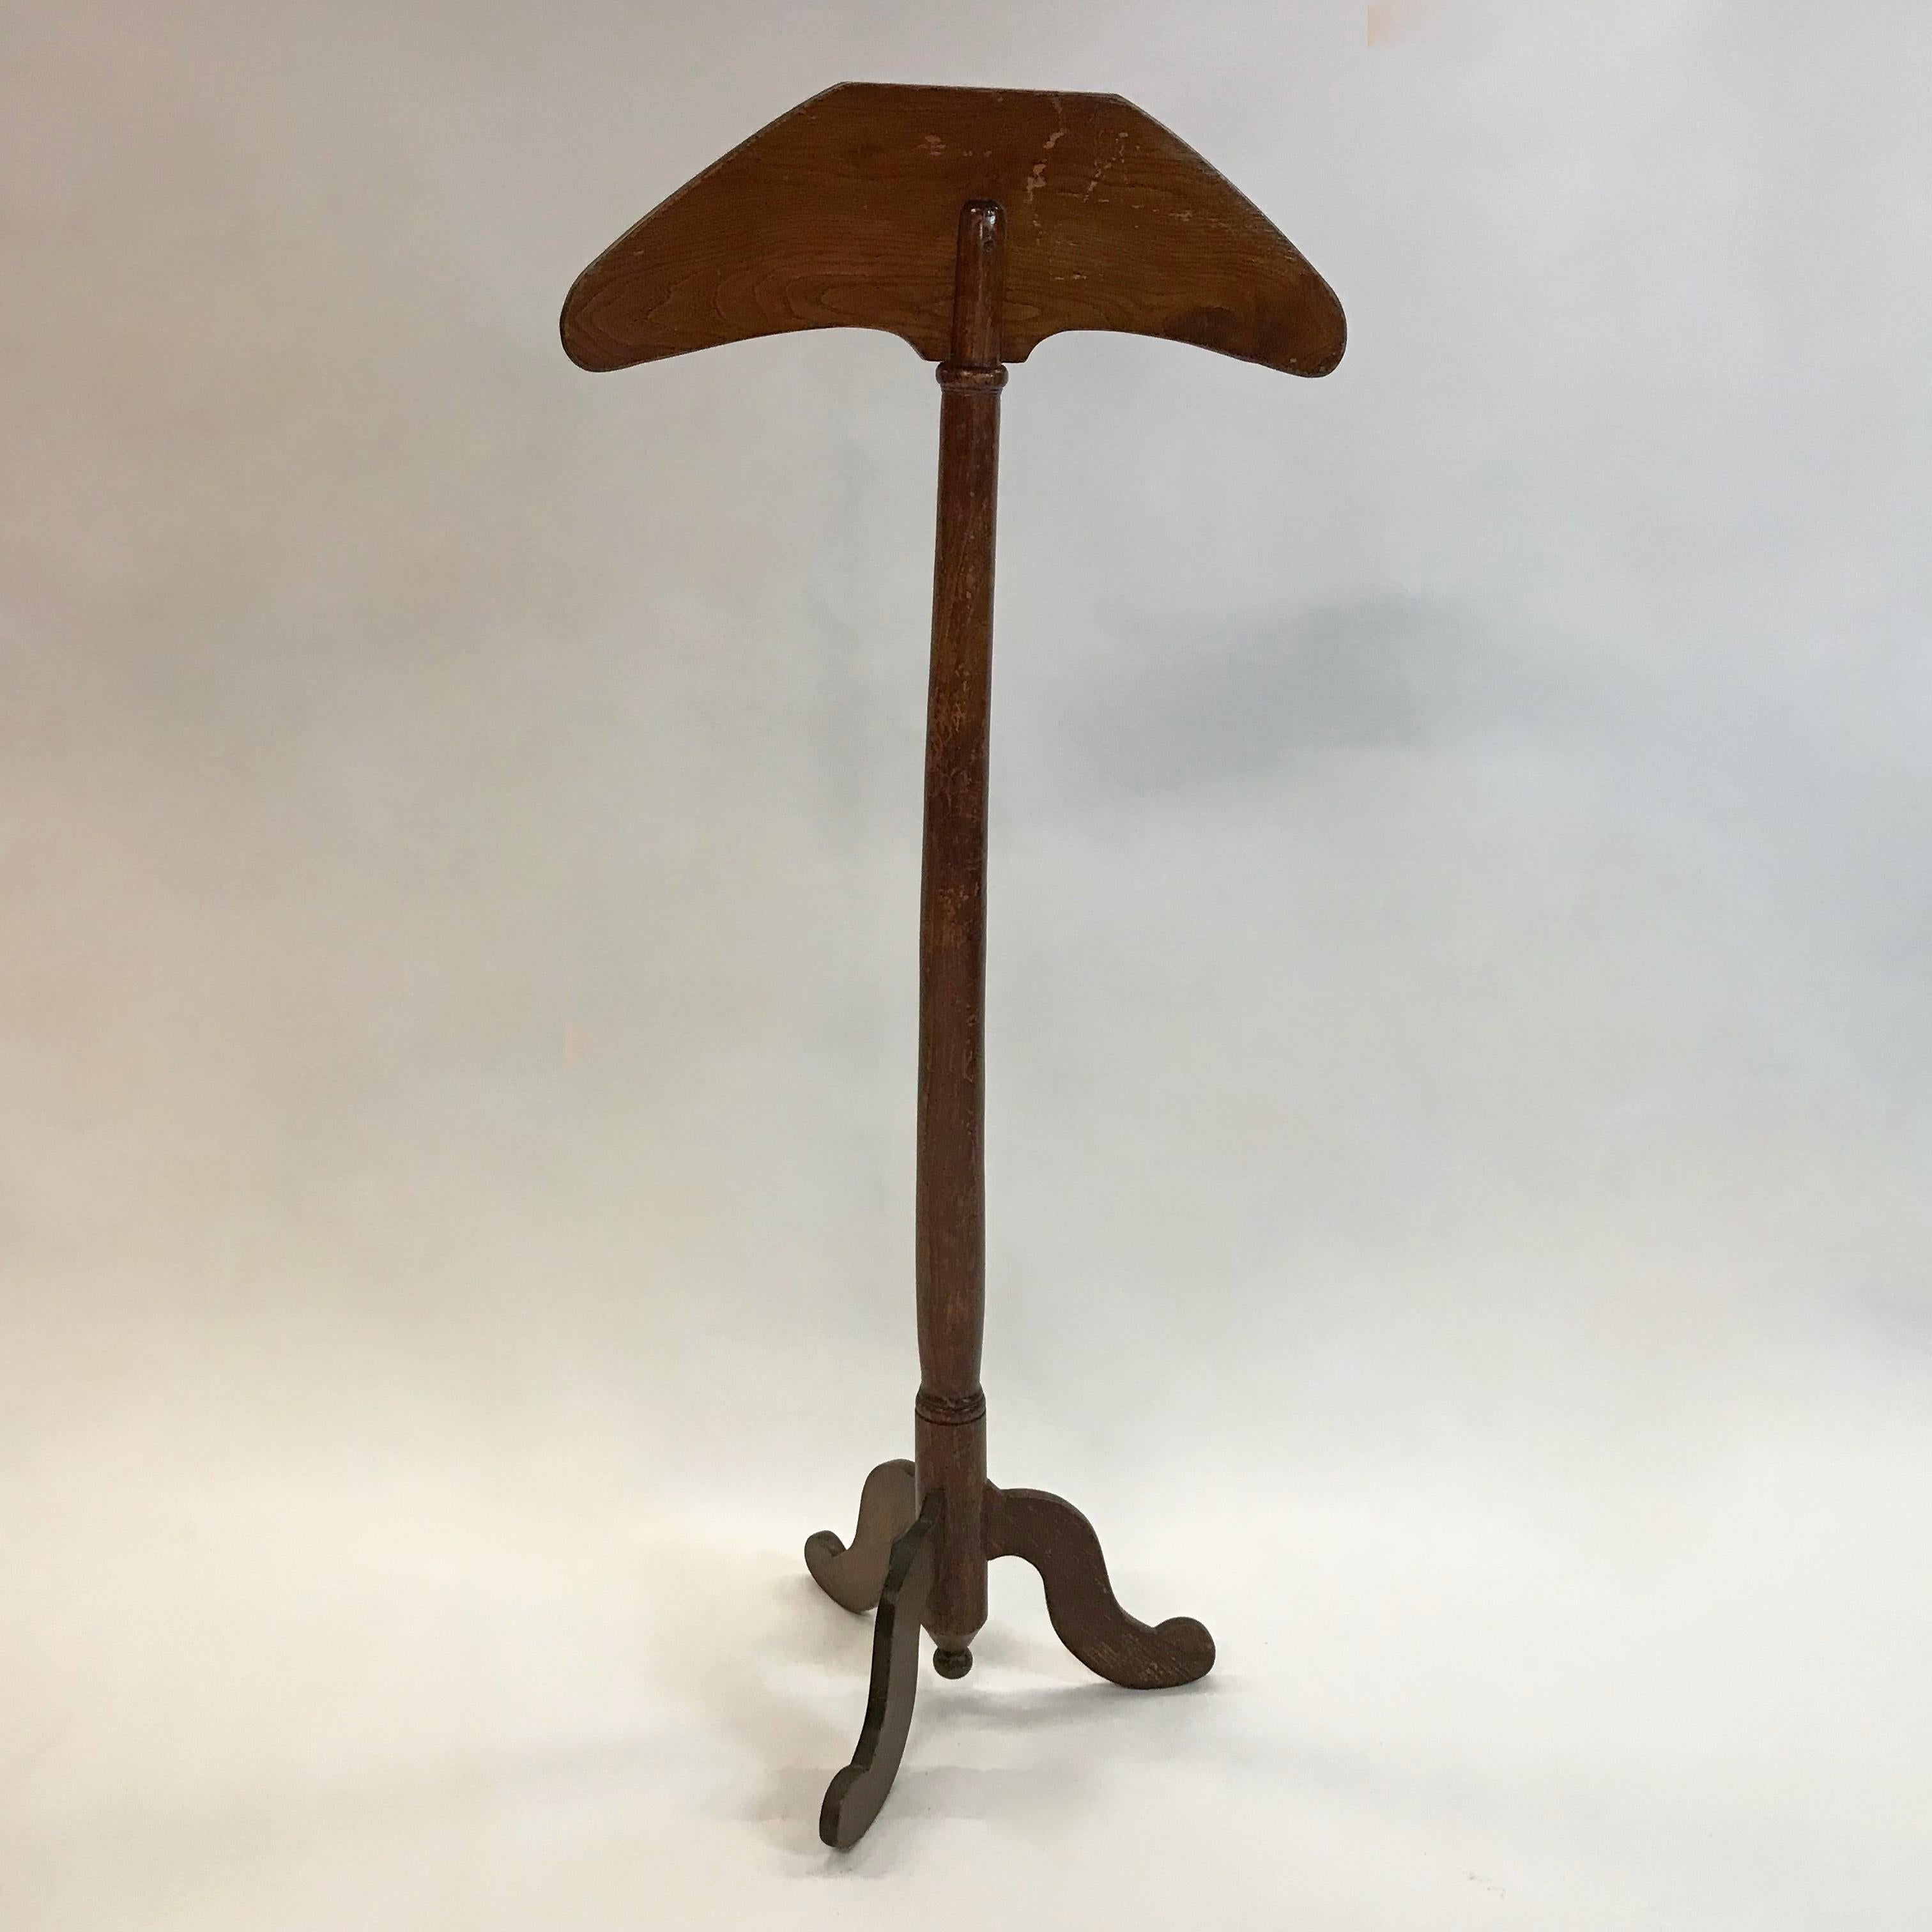 Late 19th century, tall, stained pine, coat hanger, display stand.